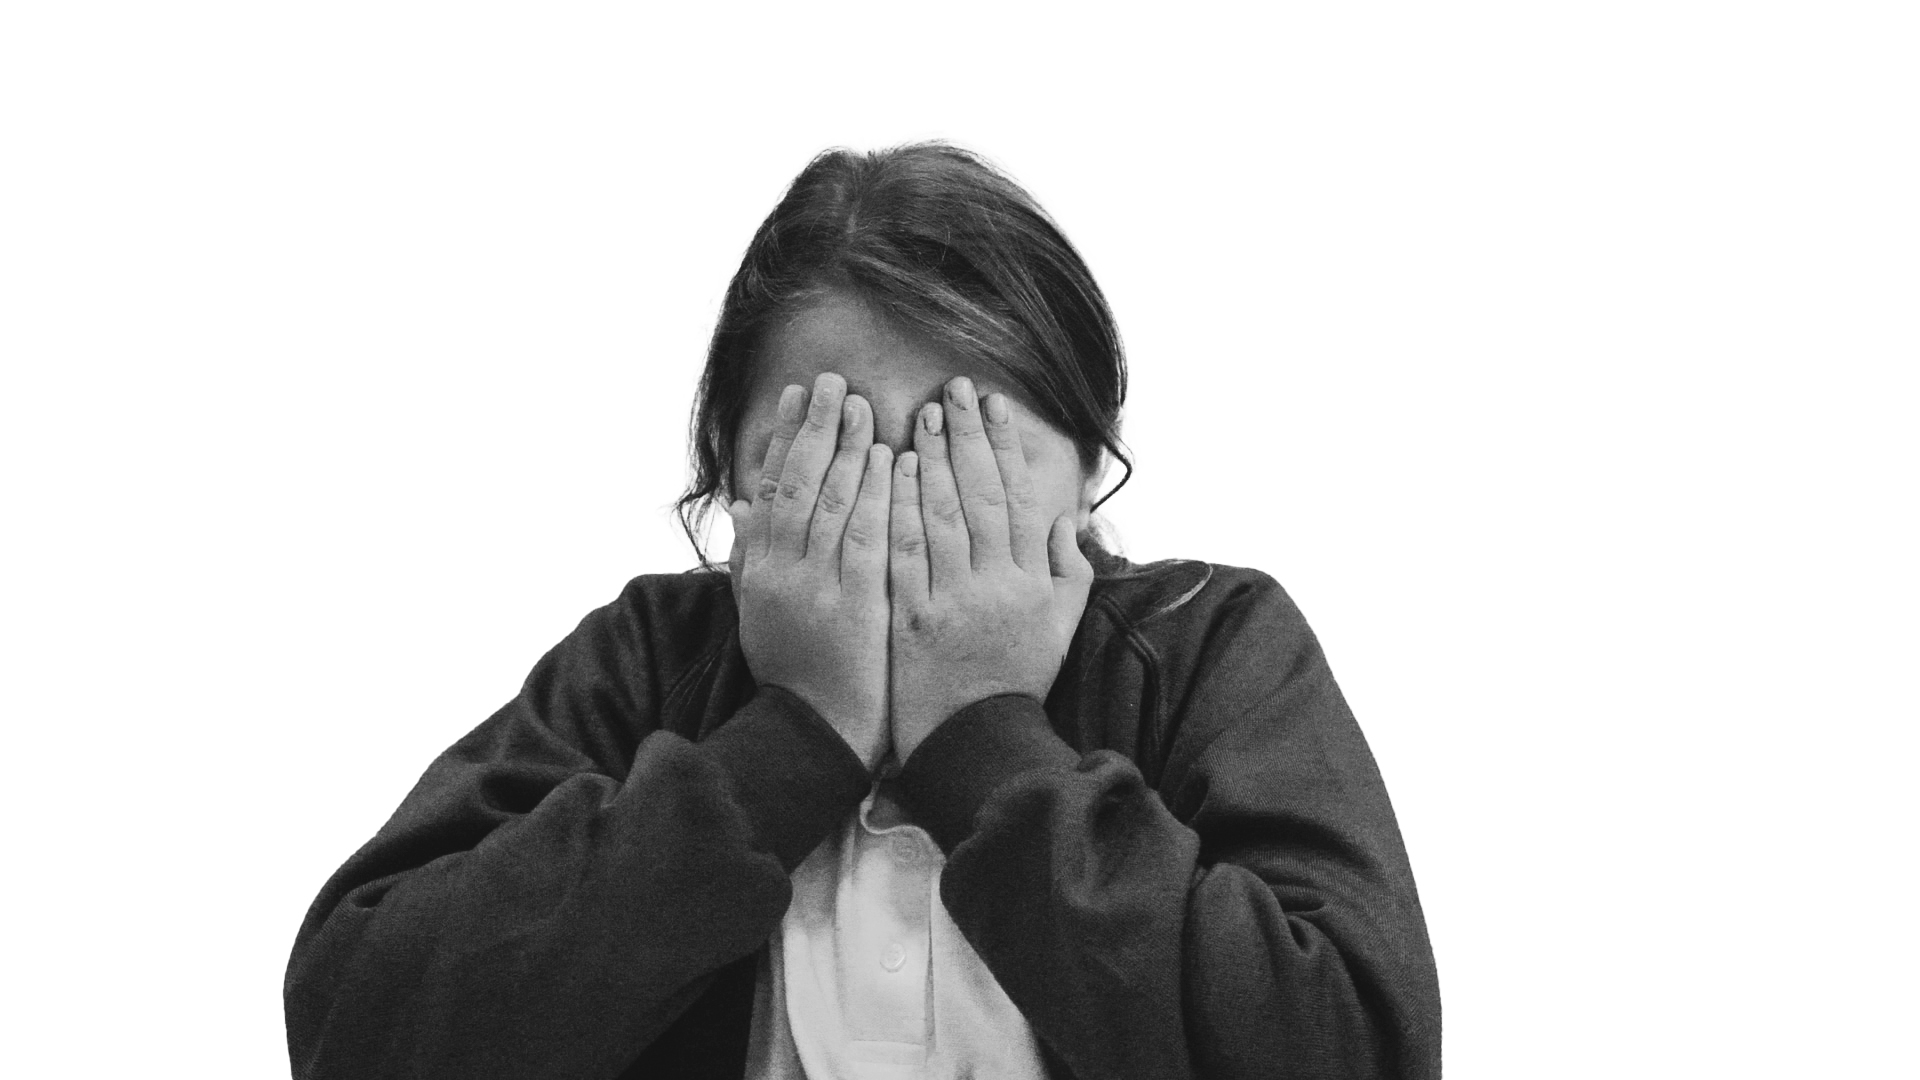 A monotone photograph of a child, covering her face with her hands